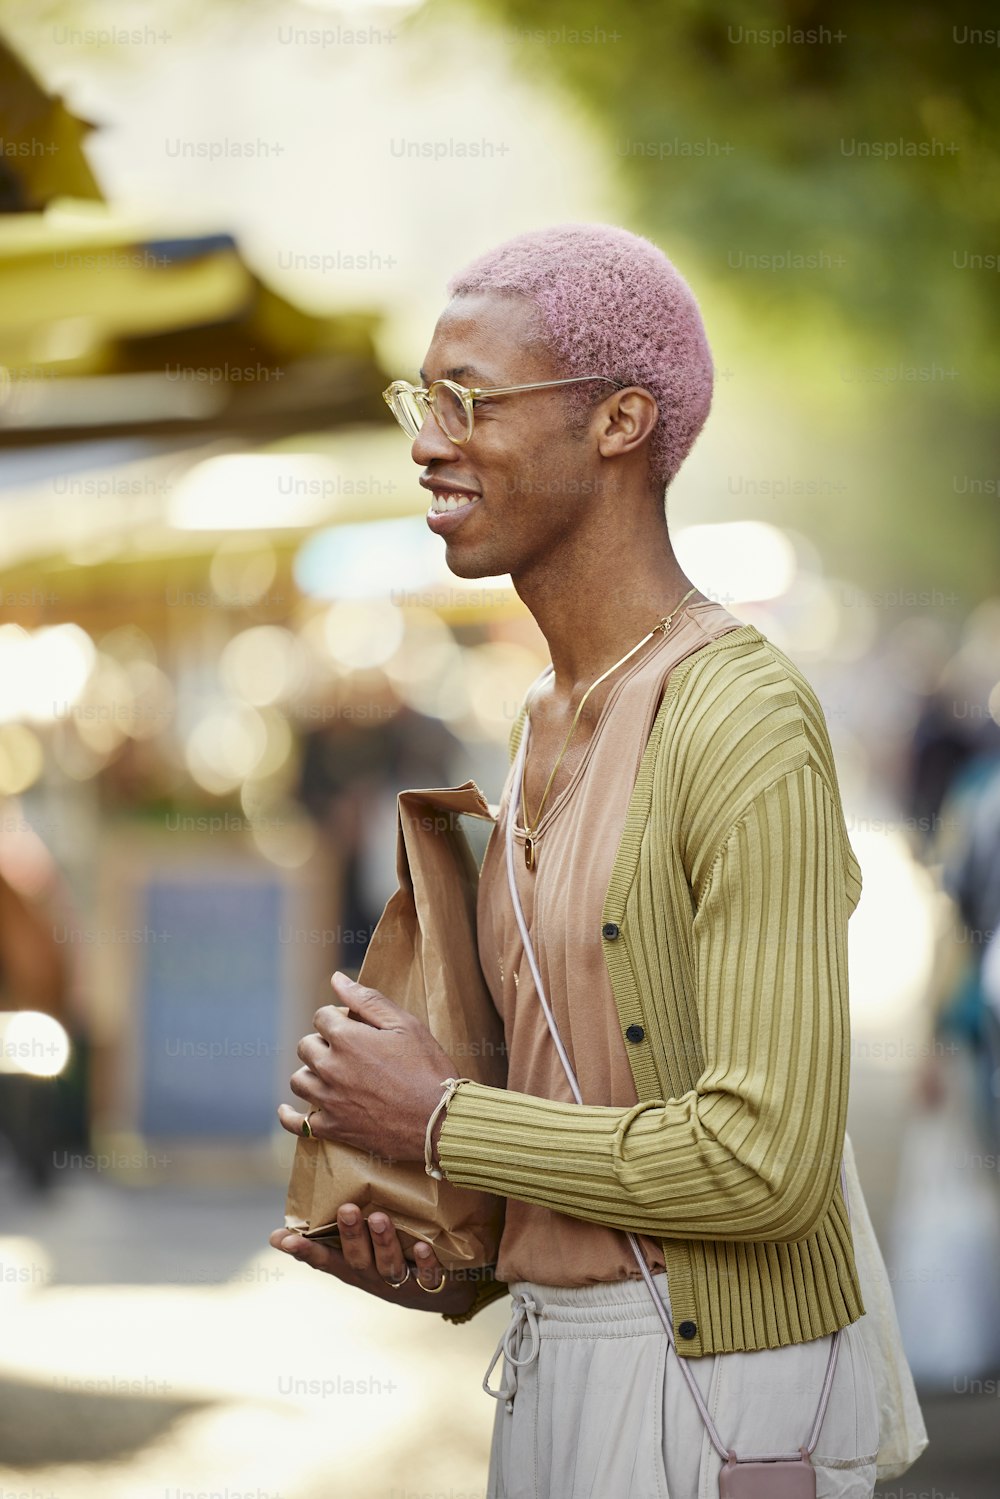 a man with pink hair and glasses holding a bag